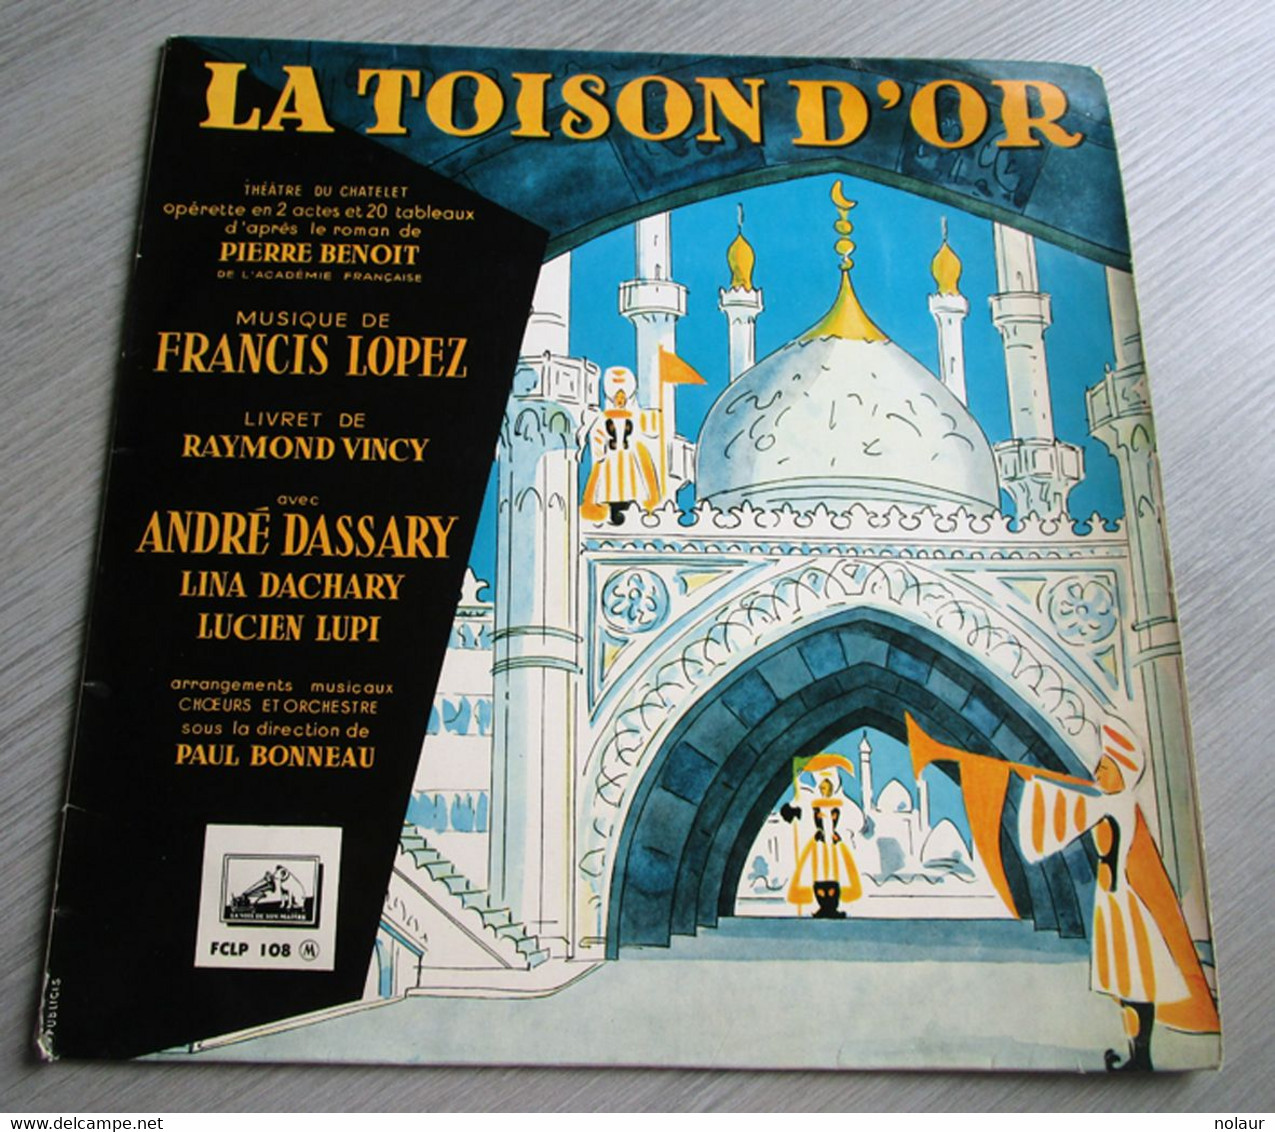 Francis Lopez / André Dassary / Lina Dachary / Lucien Lupi ‎– La Toison D'Or - Opera / Operette